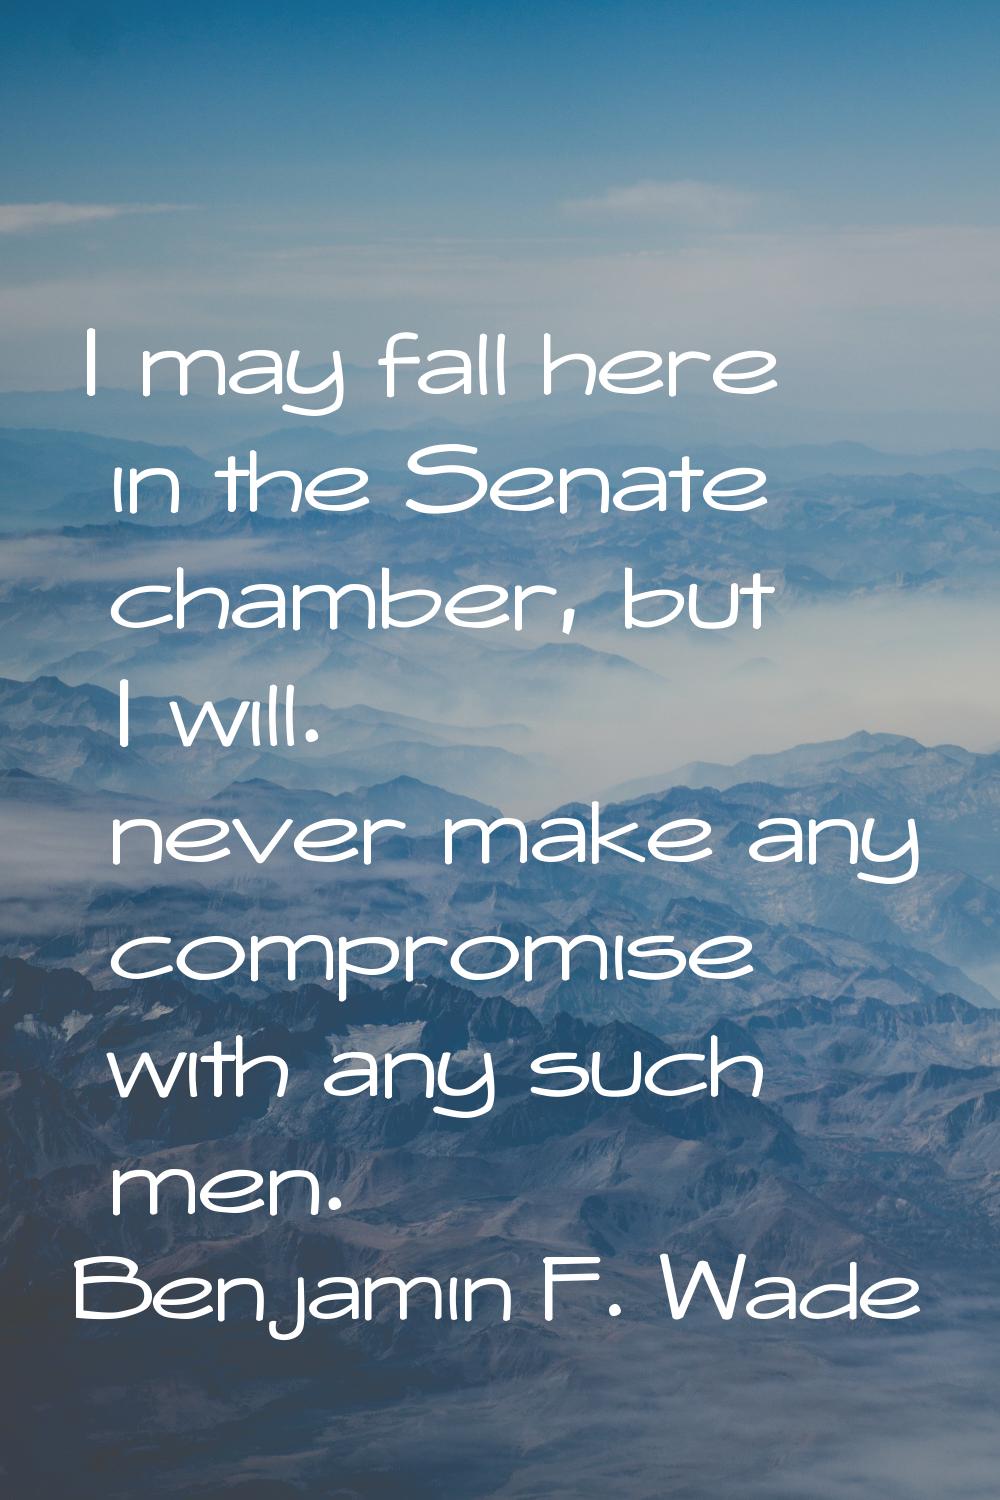 I may fall here in the Senate chamber, but I will. never make any compromise with any such men.